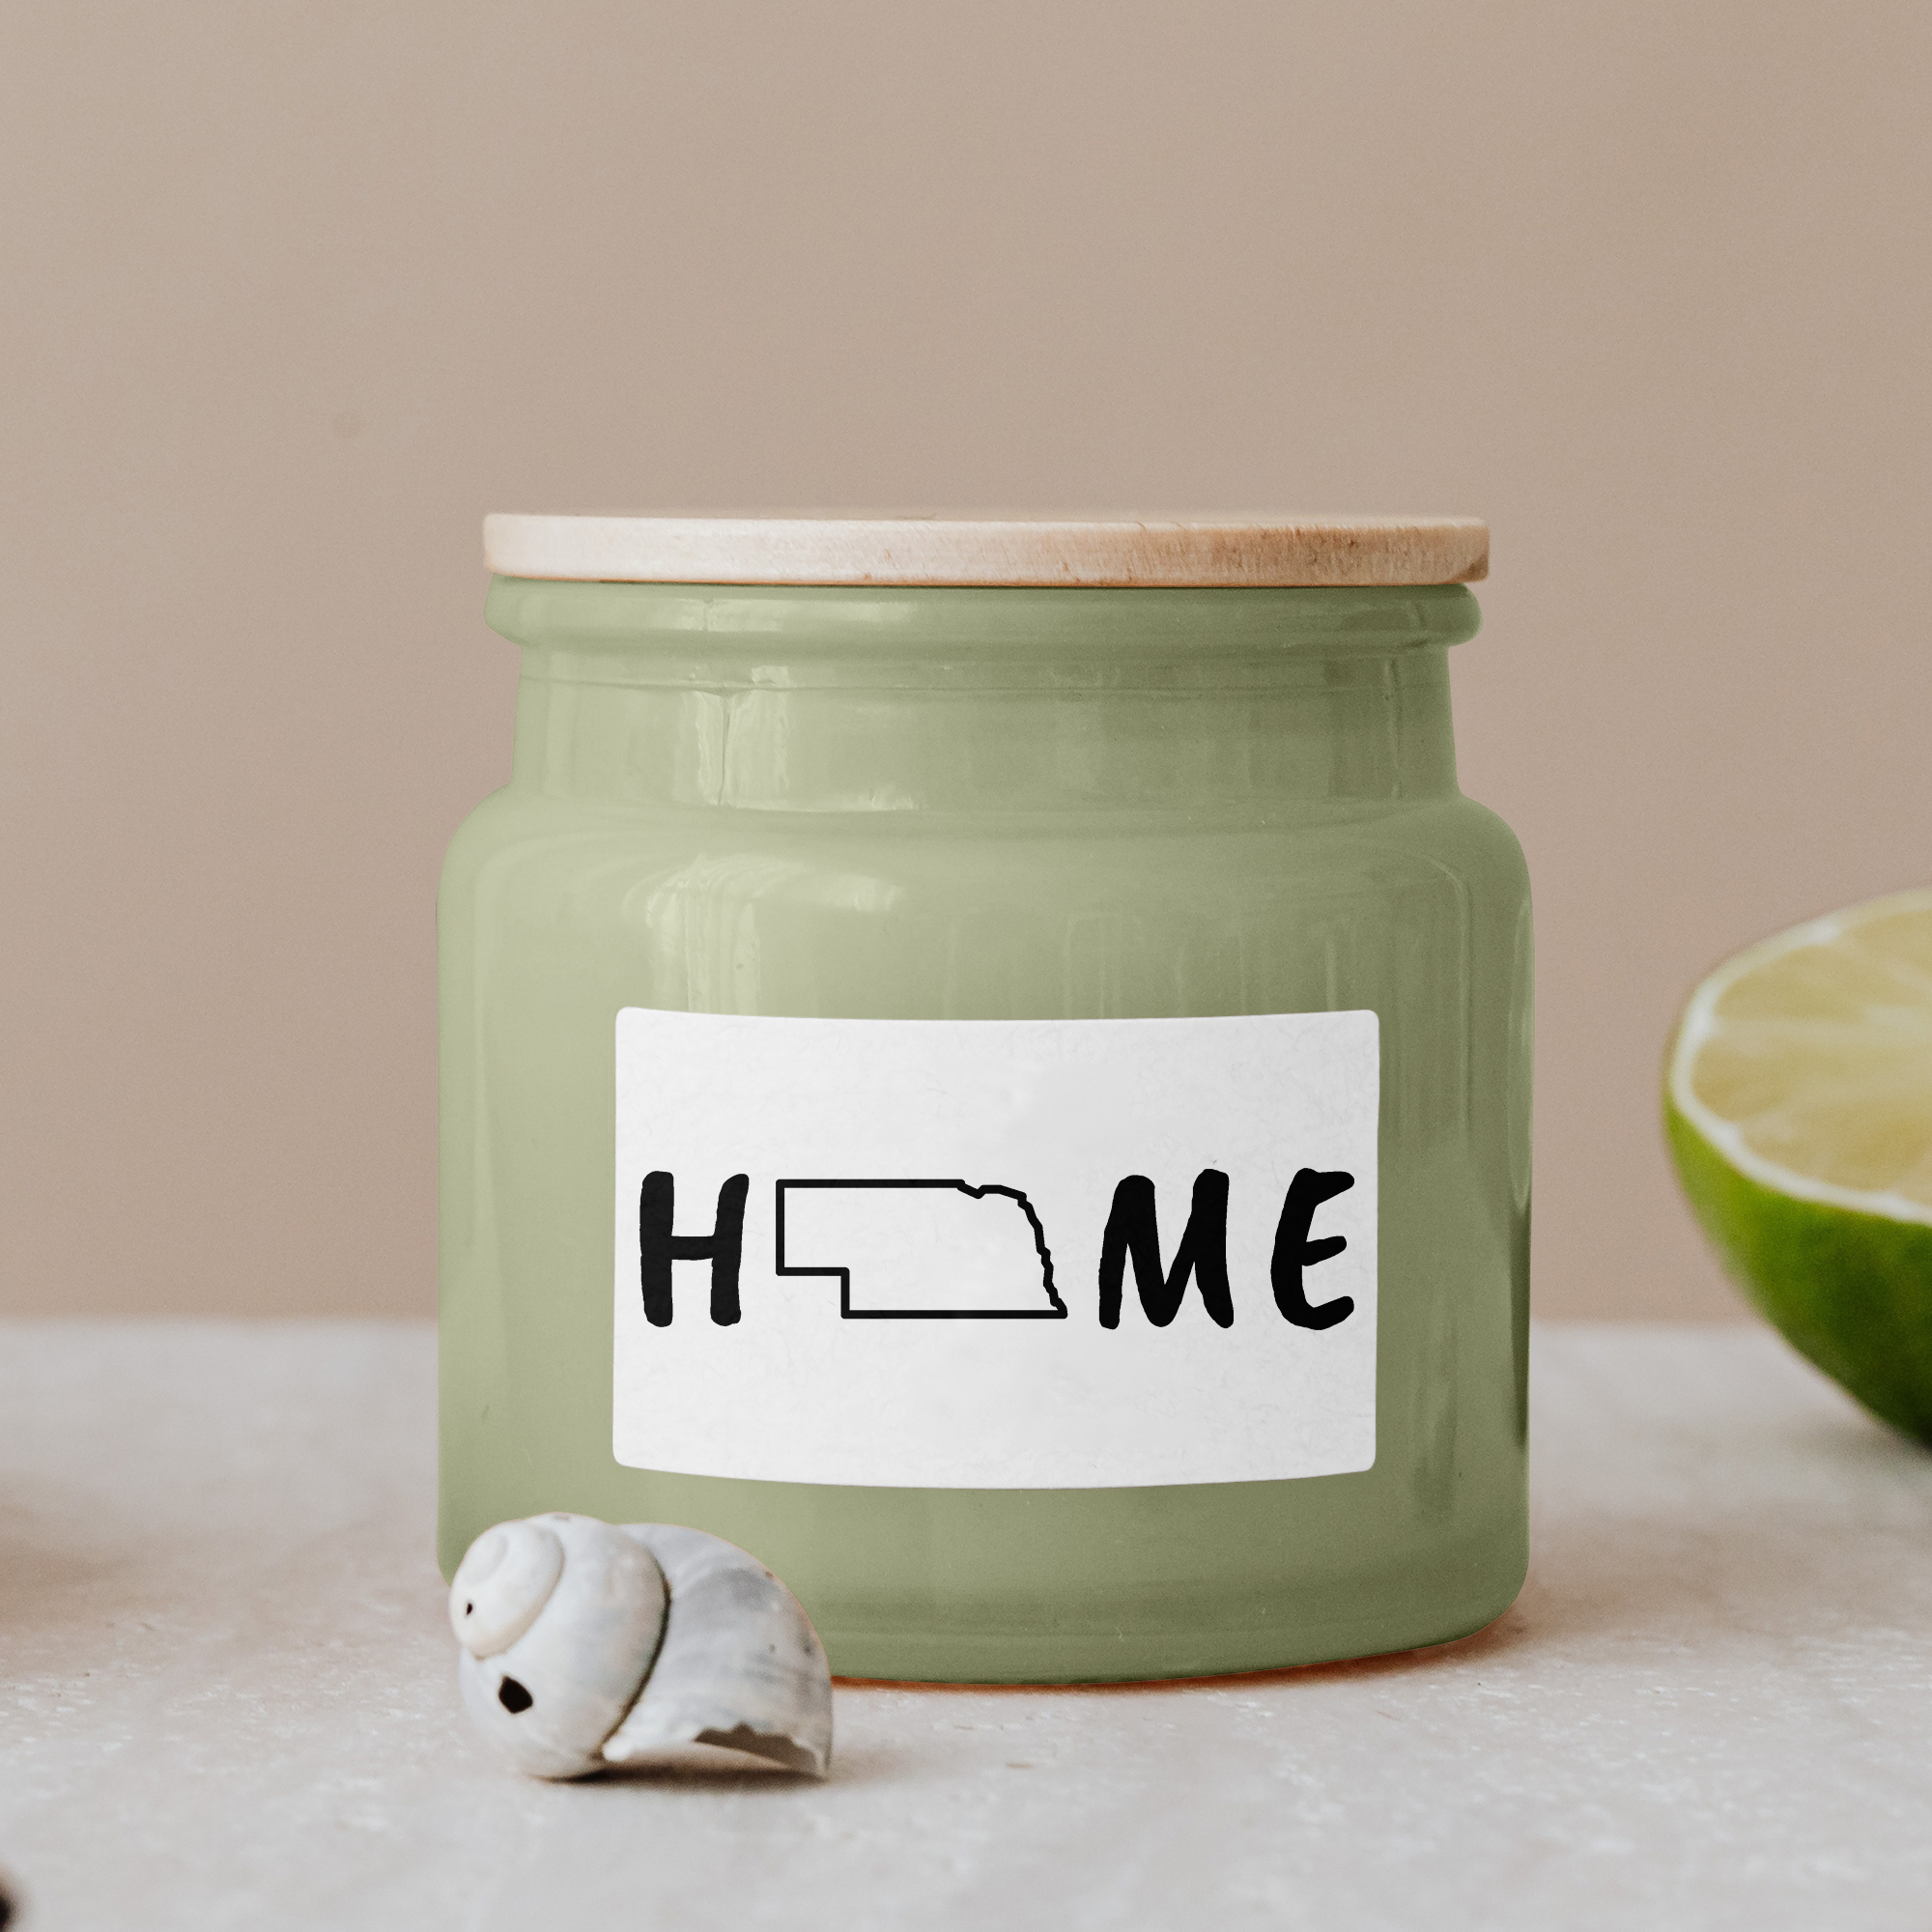 Black lettering "Home" on a white label on a green glass jar with wooden lid.